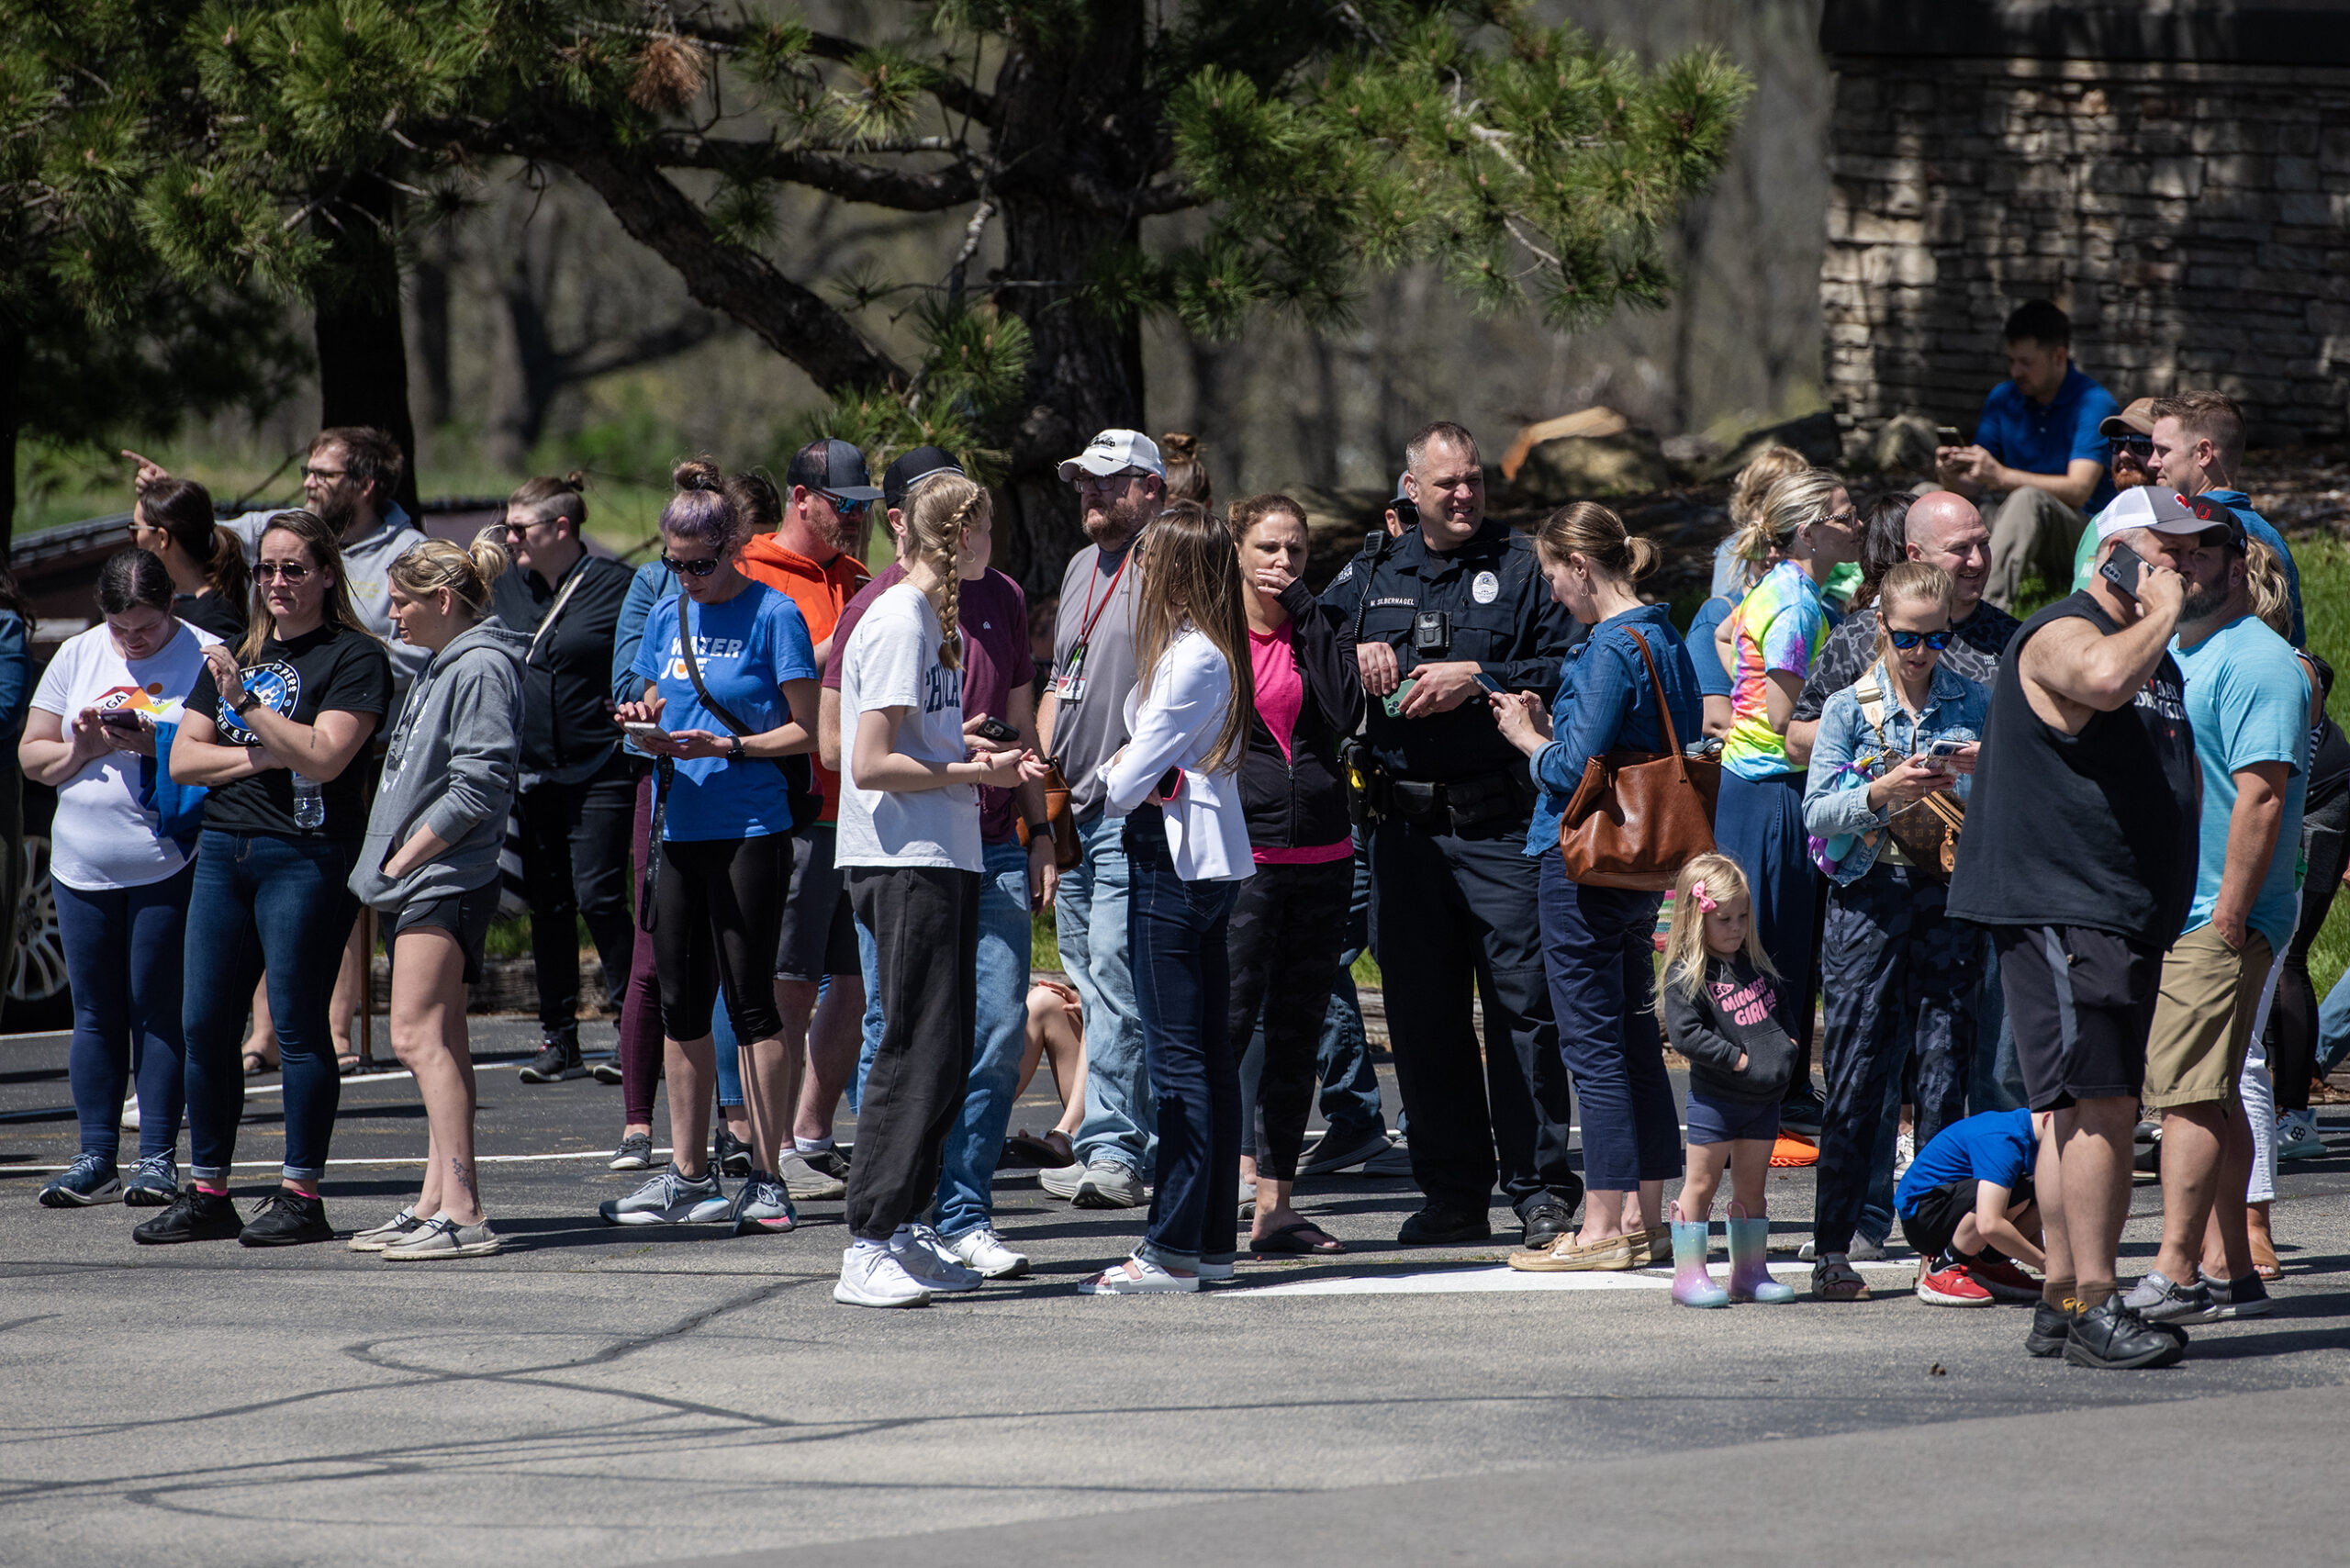 Mount Horeb School Shooting: A Community's Resilience